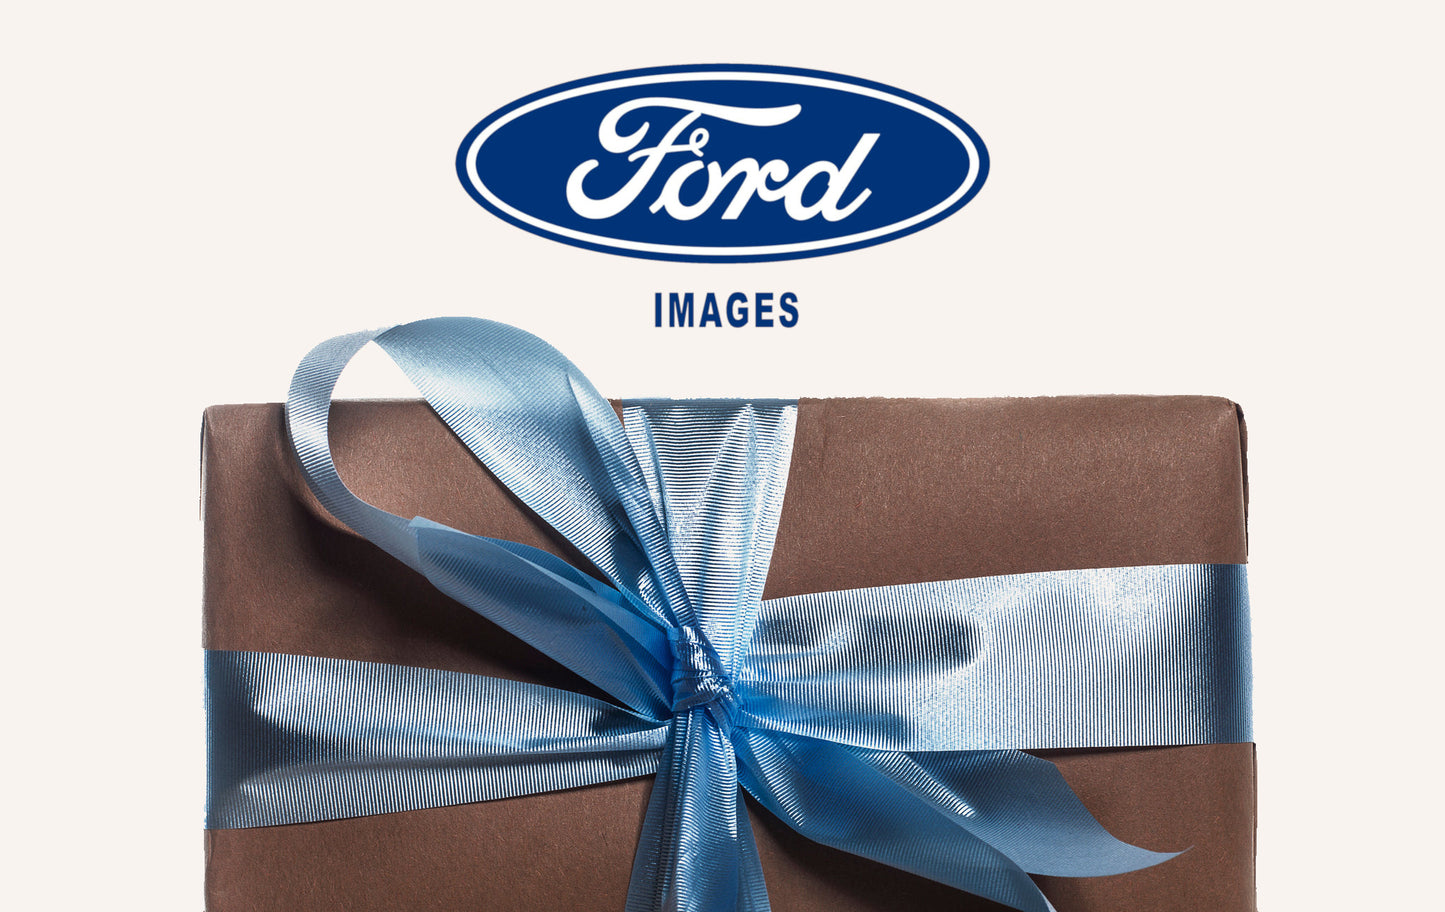 Ford Images Gift Card